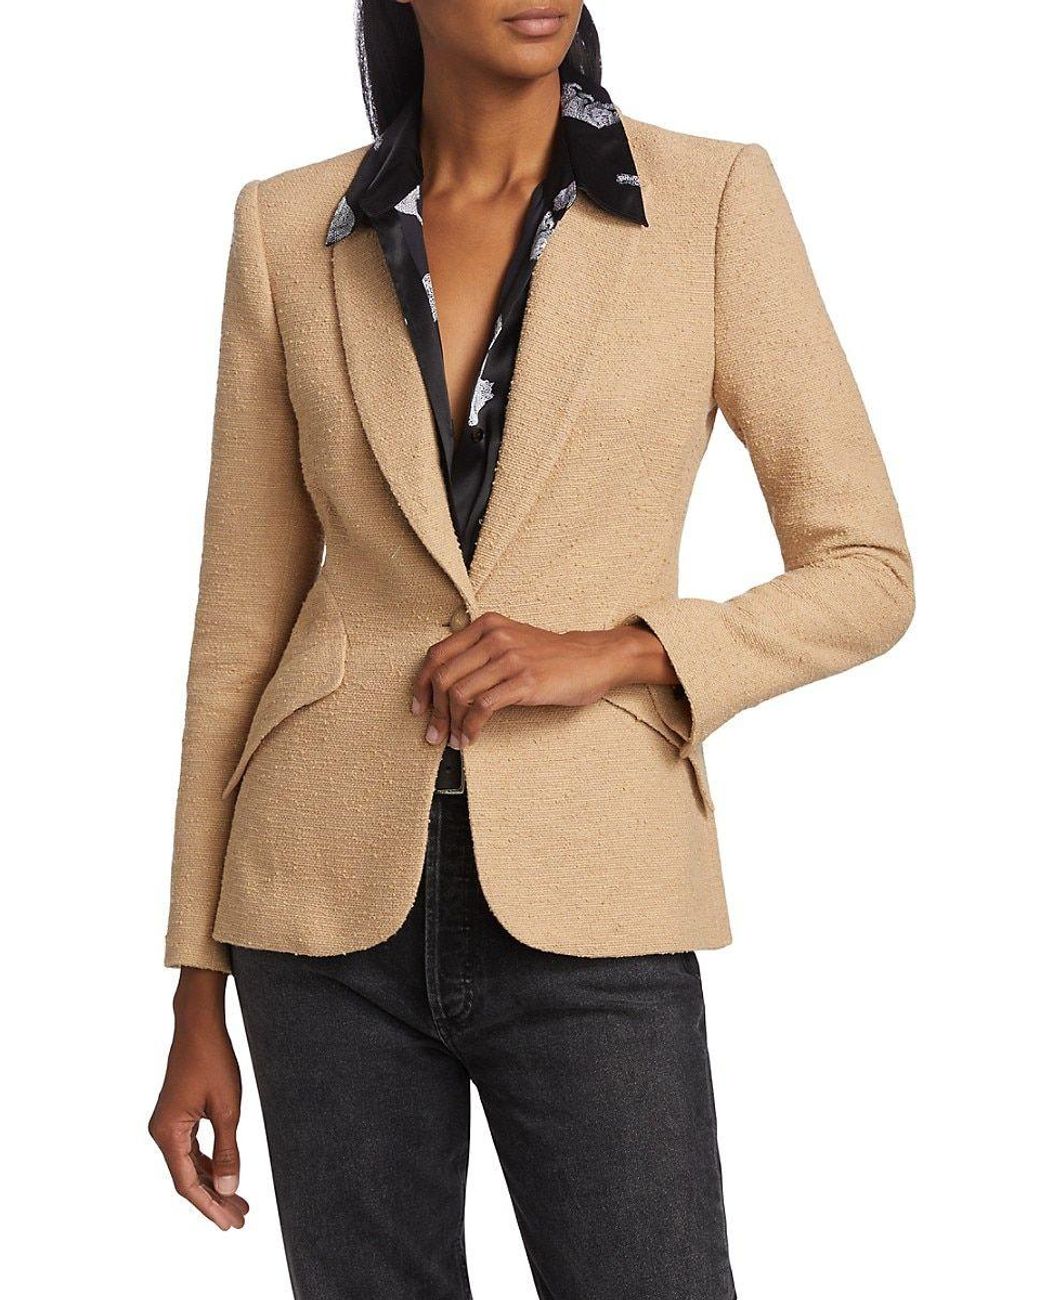 L'Agence Chamberlain One Button Blazer in Natural | Lyst